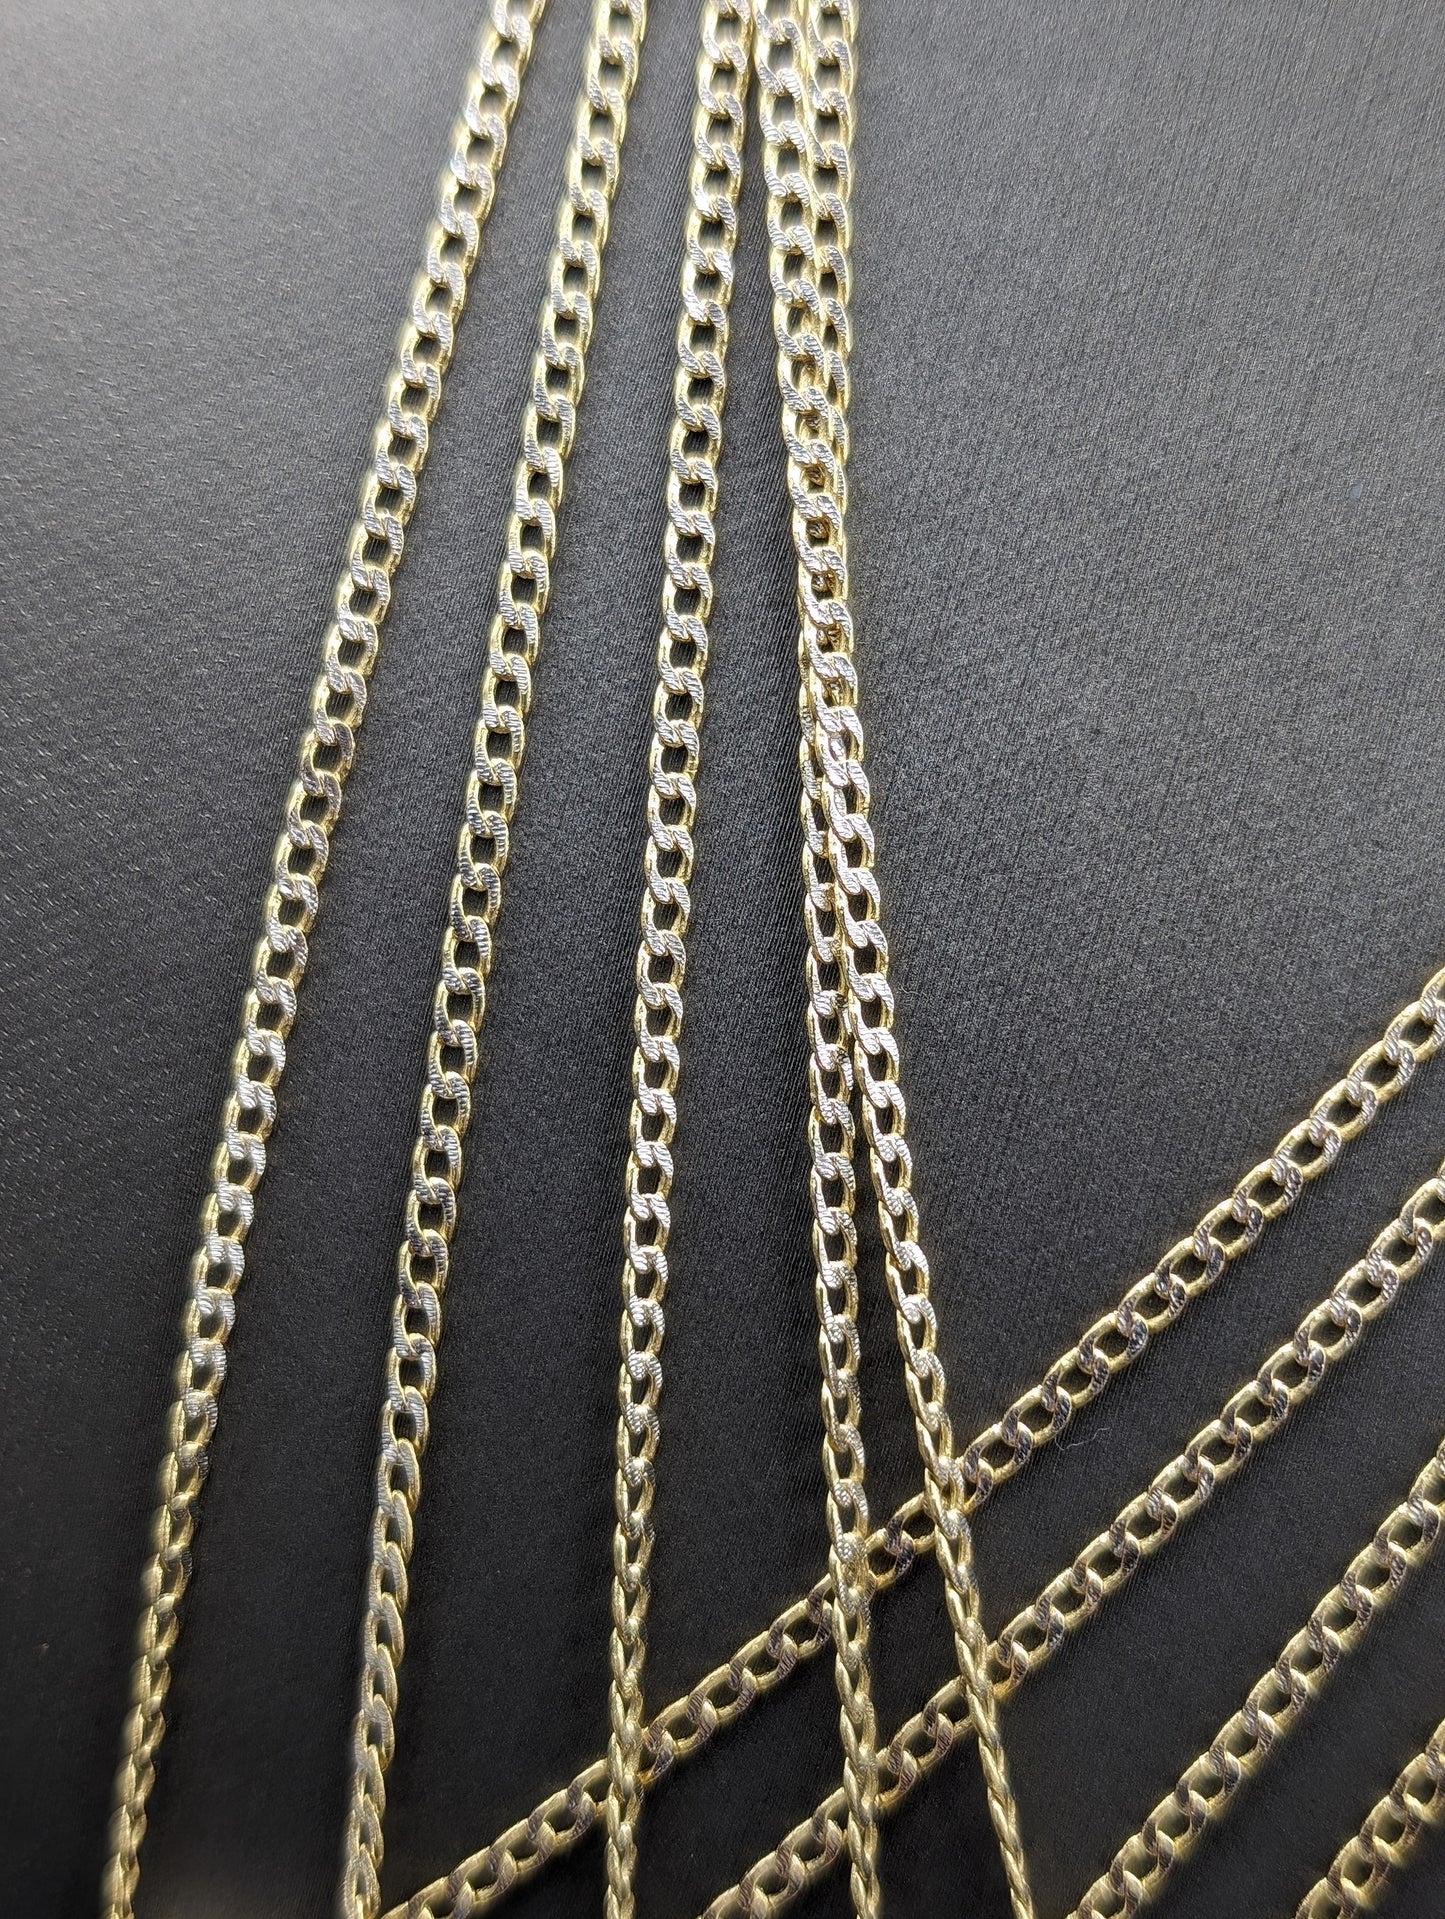 14k Cuban chain with Pendant